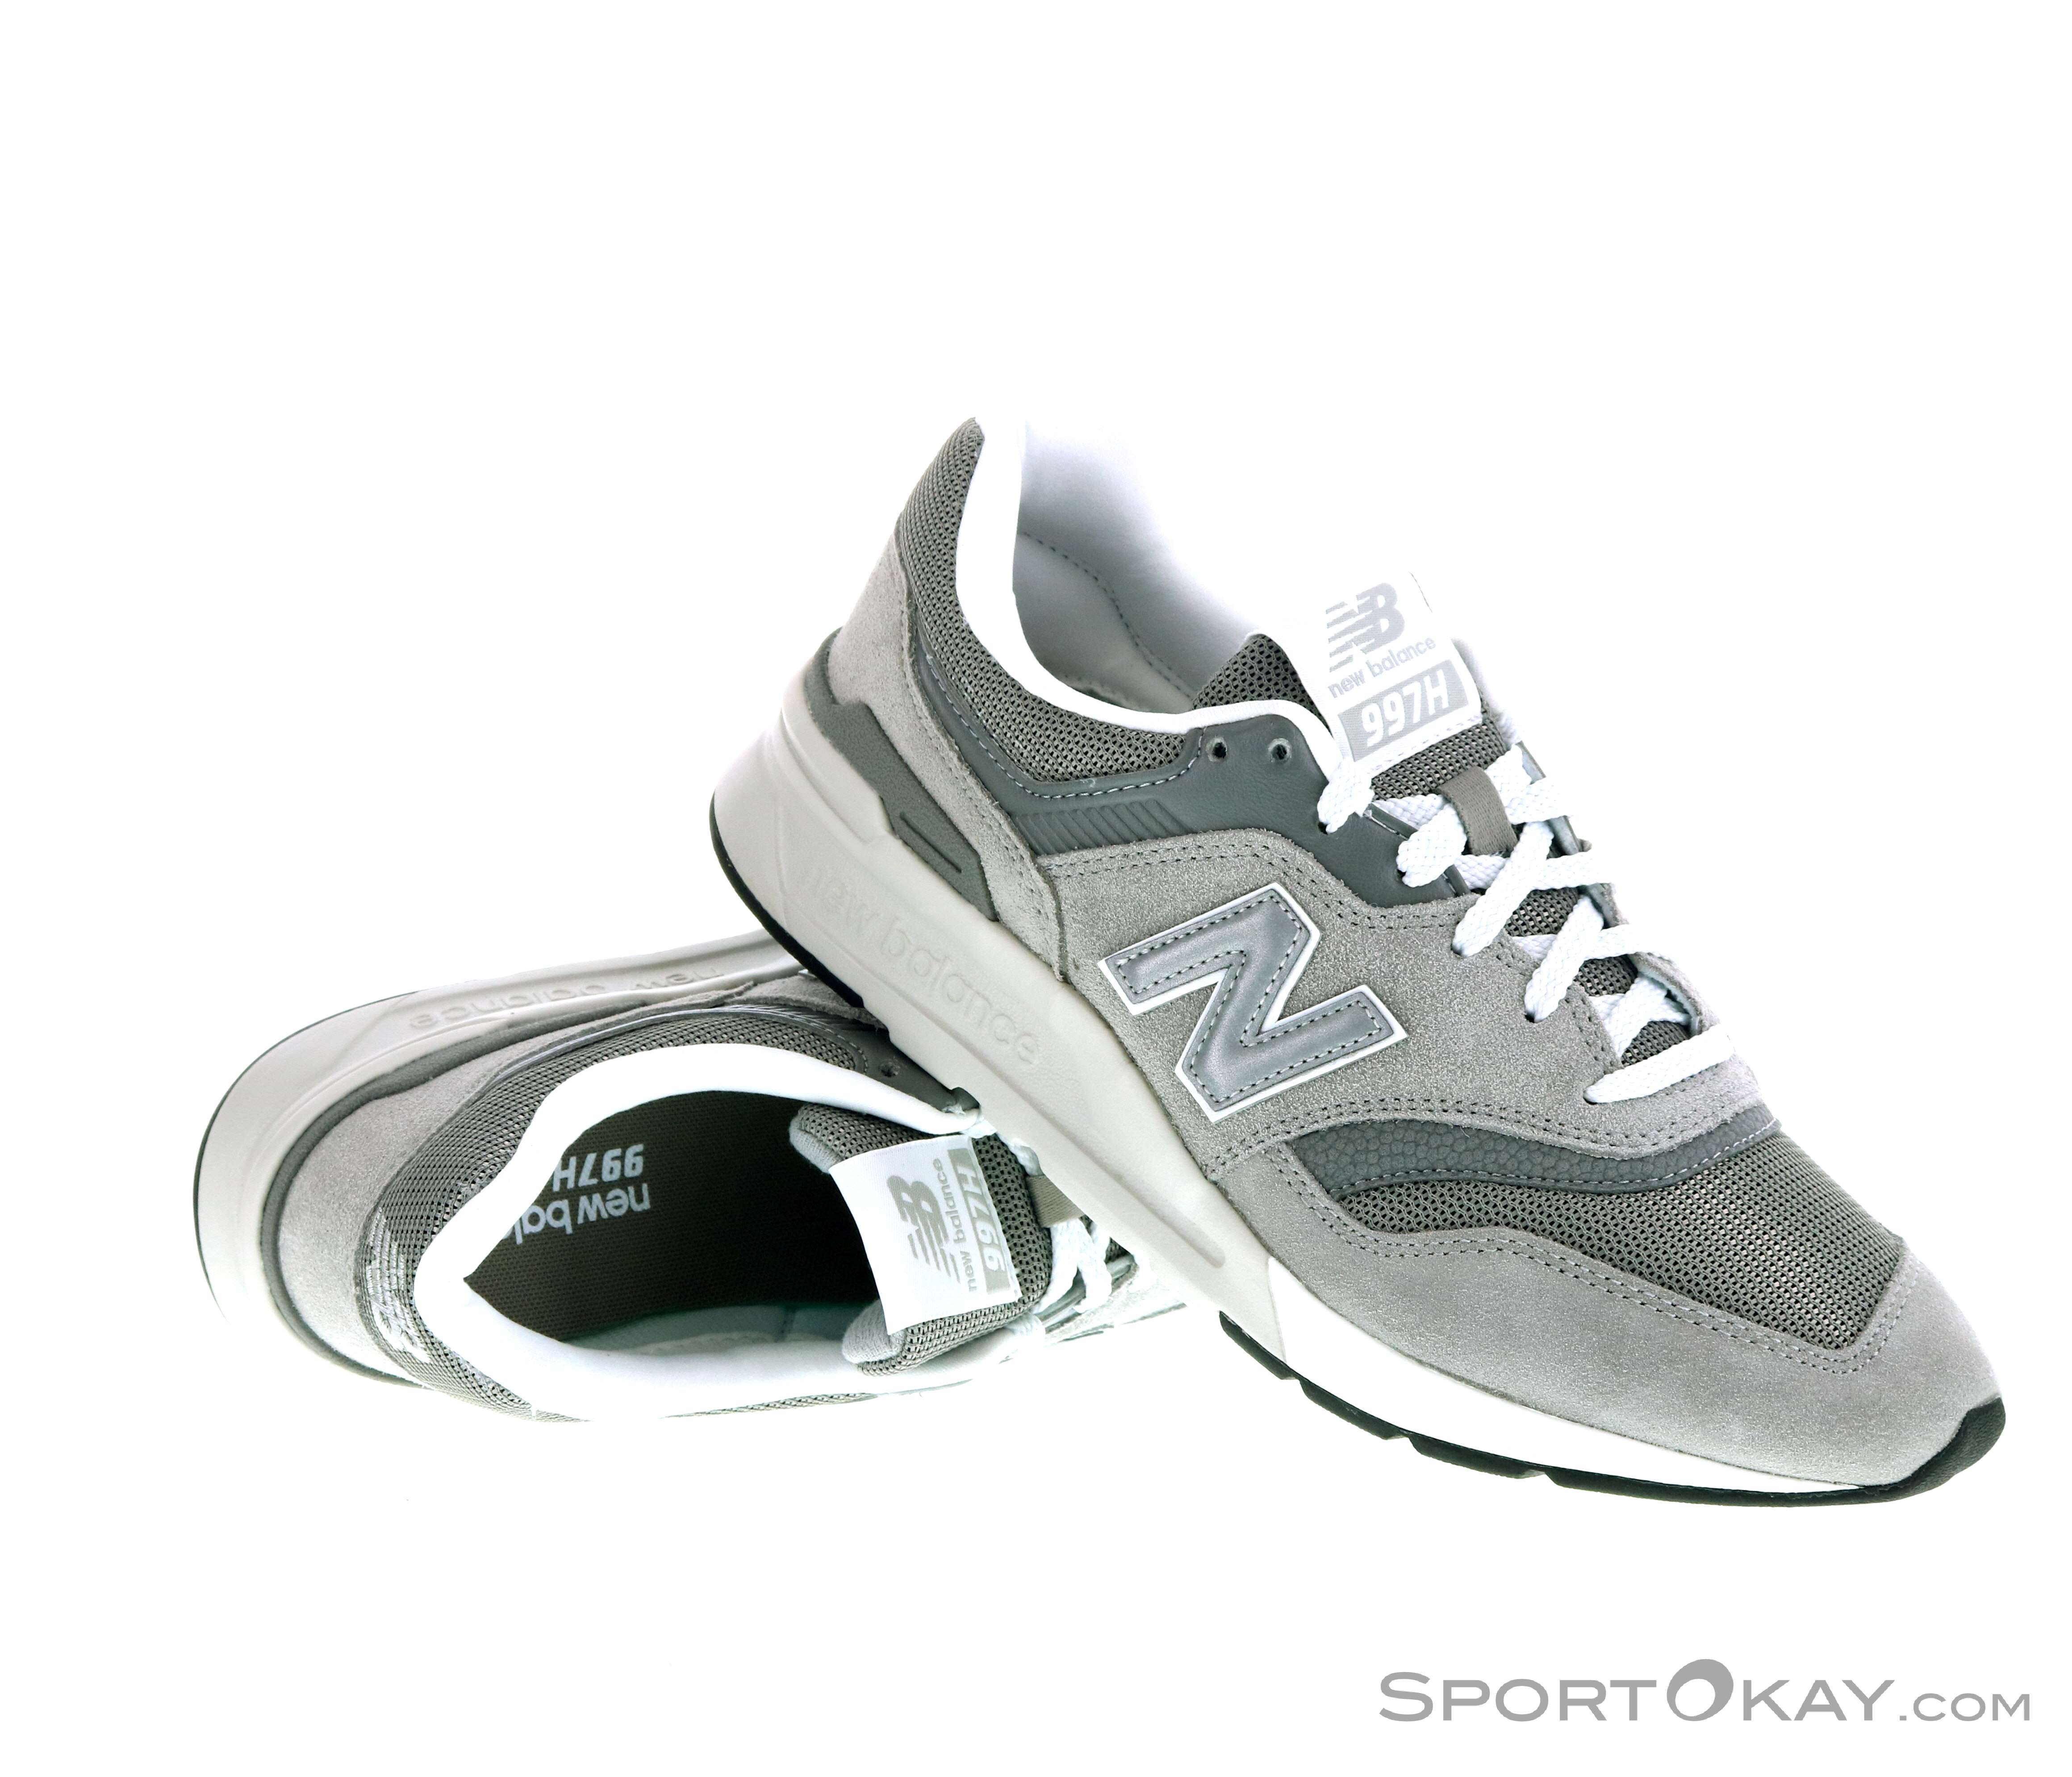 New Balance 997 Classic Mens Leisure Shoes - Leisure Shoes - Shoes & Poles  - Outdoor - All